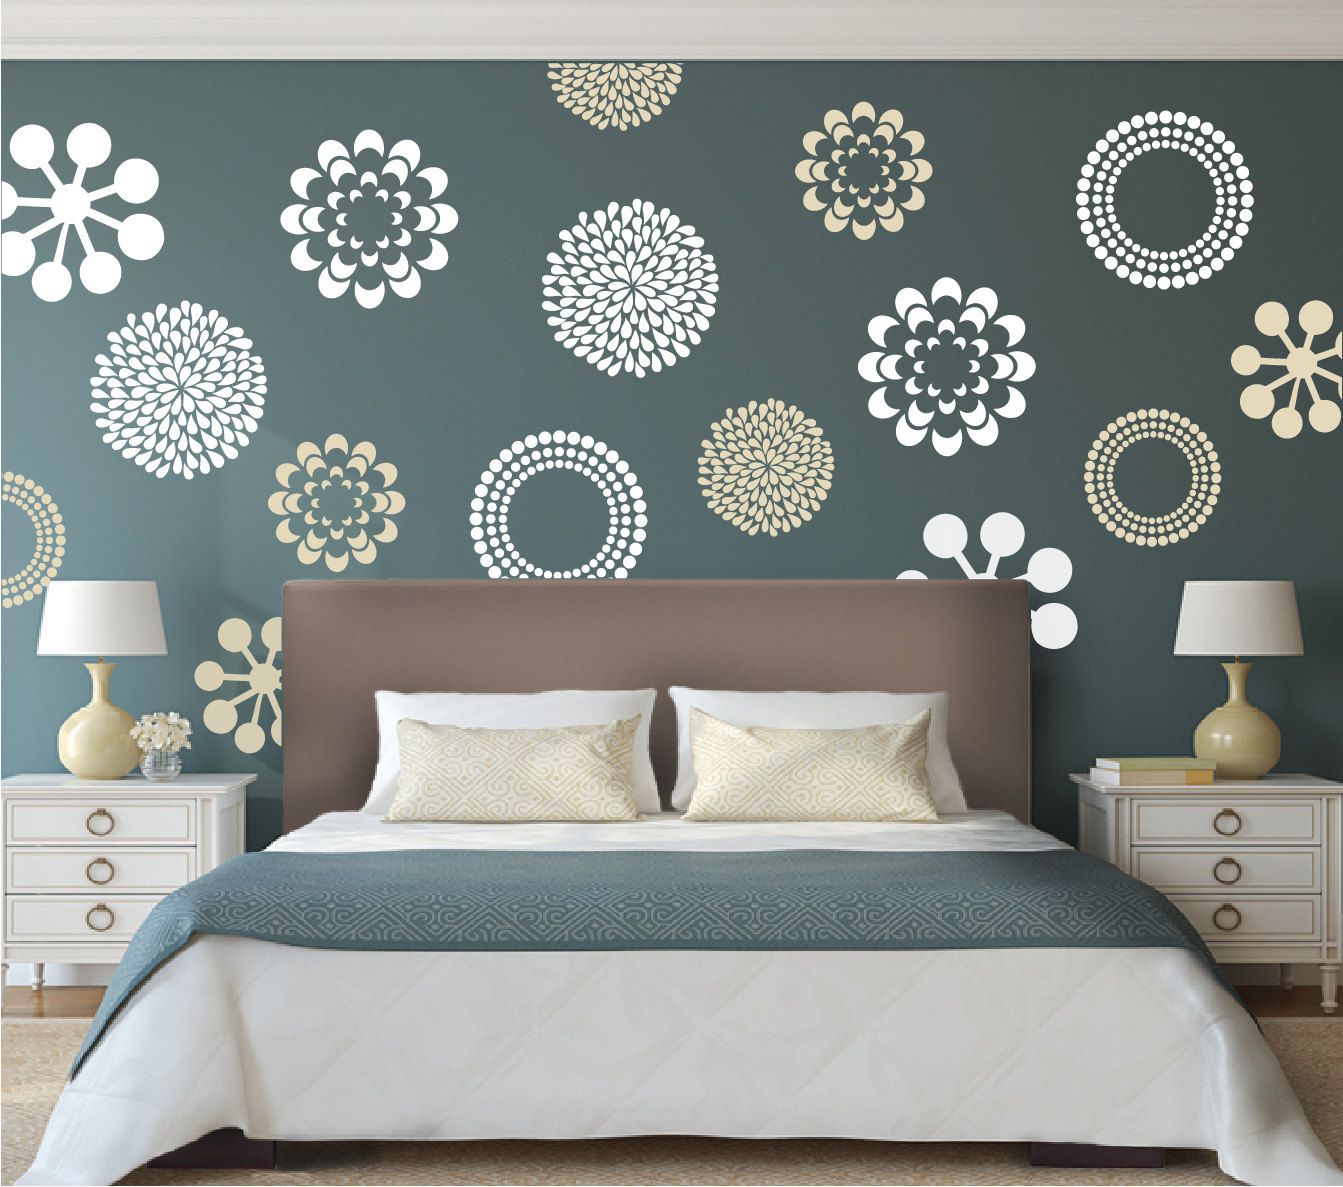 Are You Prepared For Implementing Wall Stickers In The Bedroom?